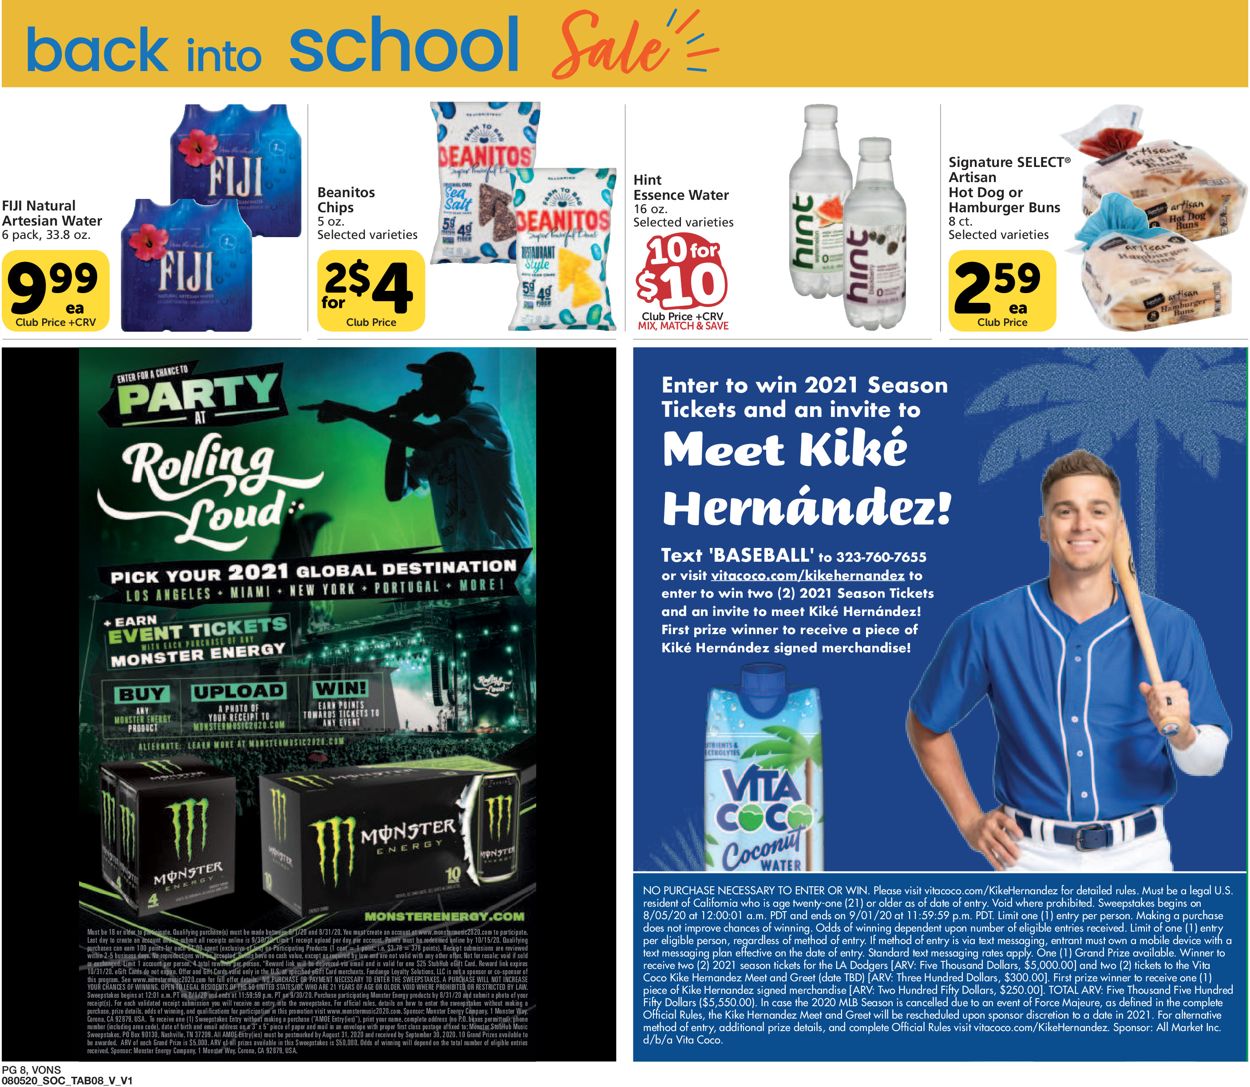 Vons Ad from 08/05/2020